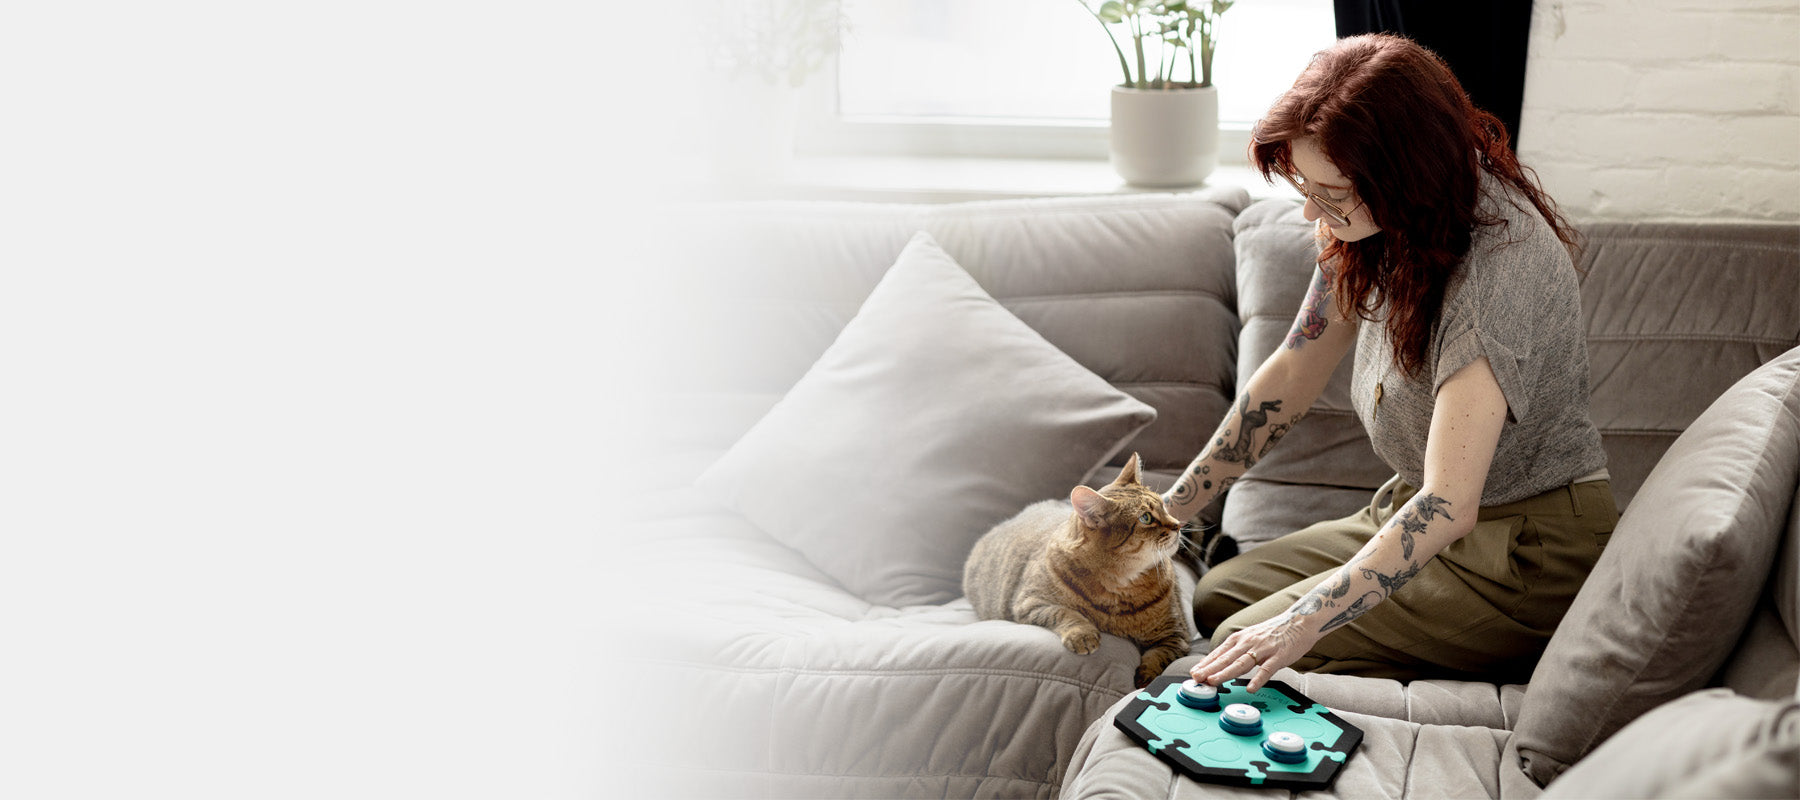 Find out what your cat wants and needs with recordable talking buttons.